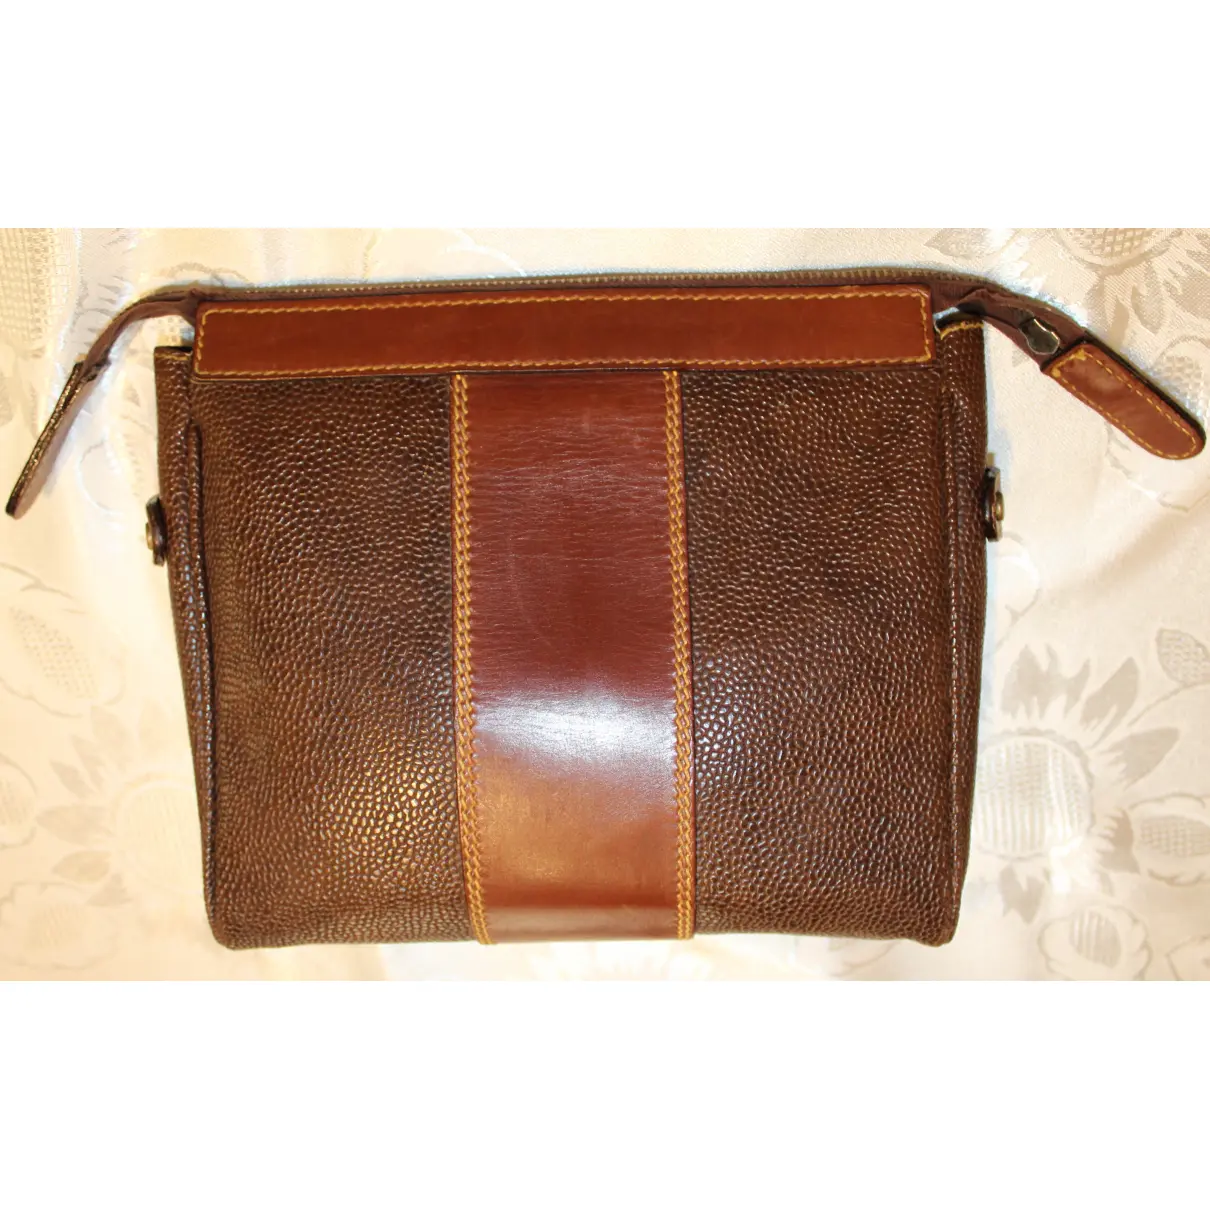 Buy Timberland Leather small bag online - Vintage